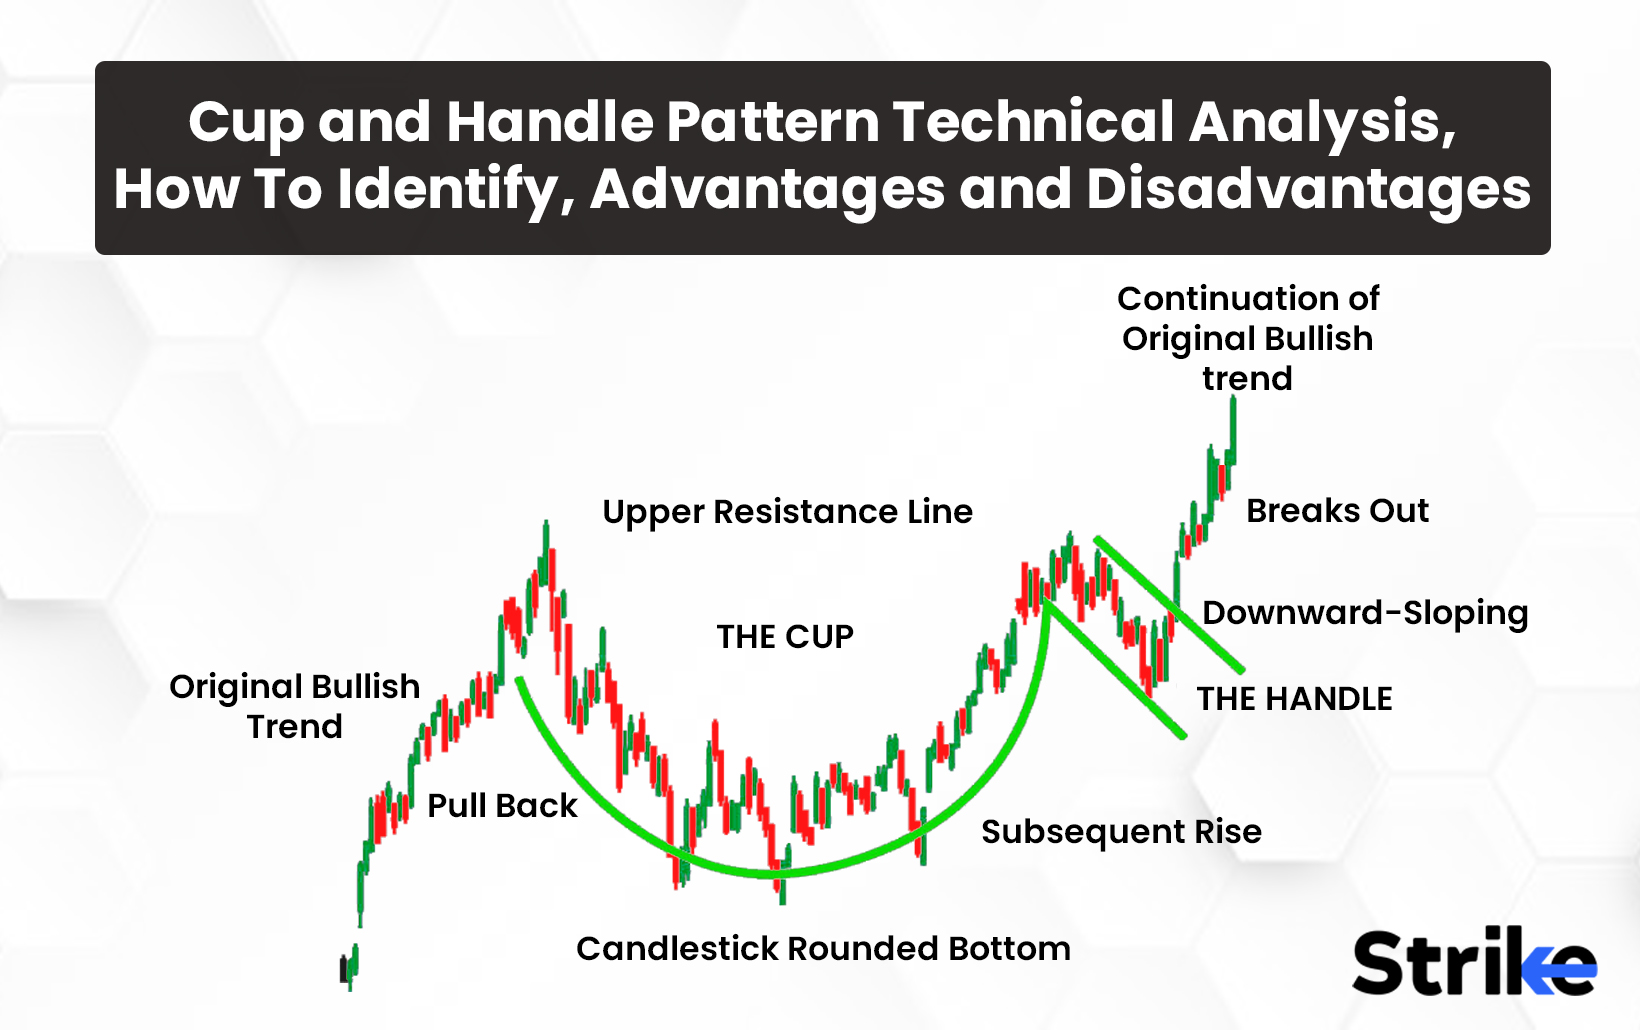 Cup and Handle Pattern: Technical Analysis, How To Identify, Advantages and Disadvantages